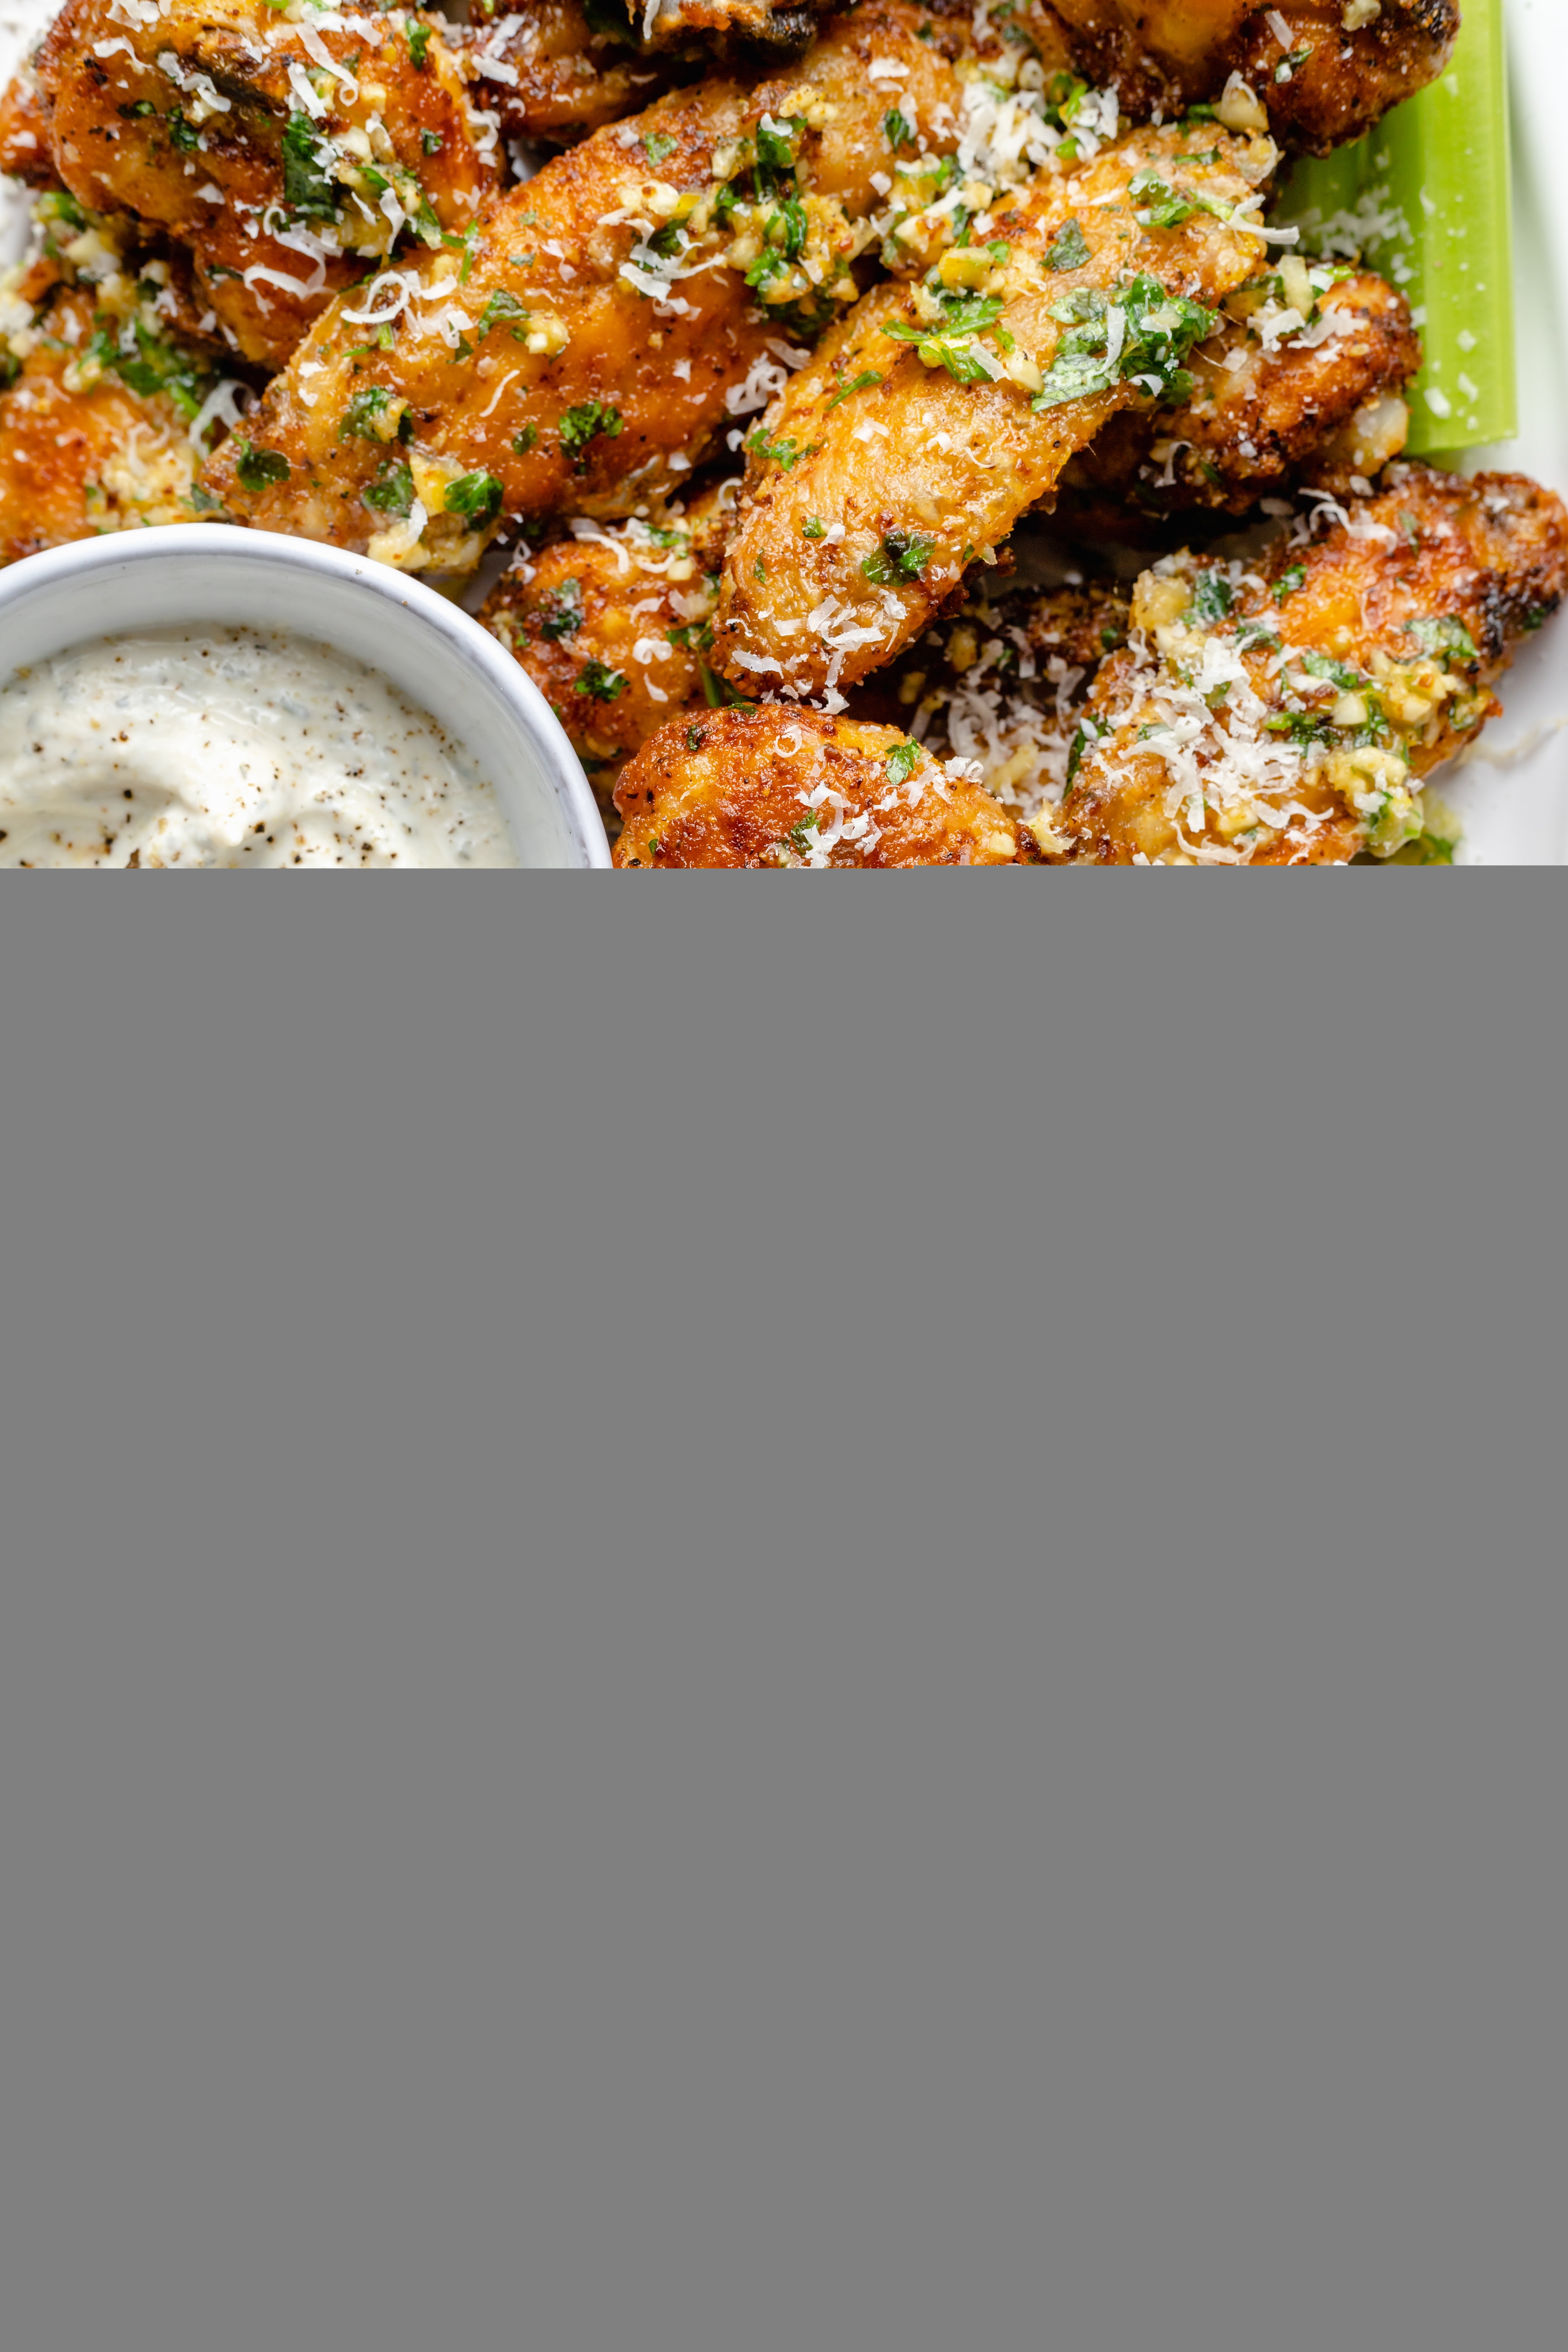 garlic parmesan wings on plate with dipping sauce